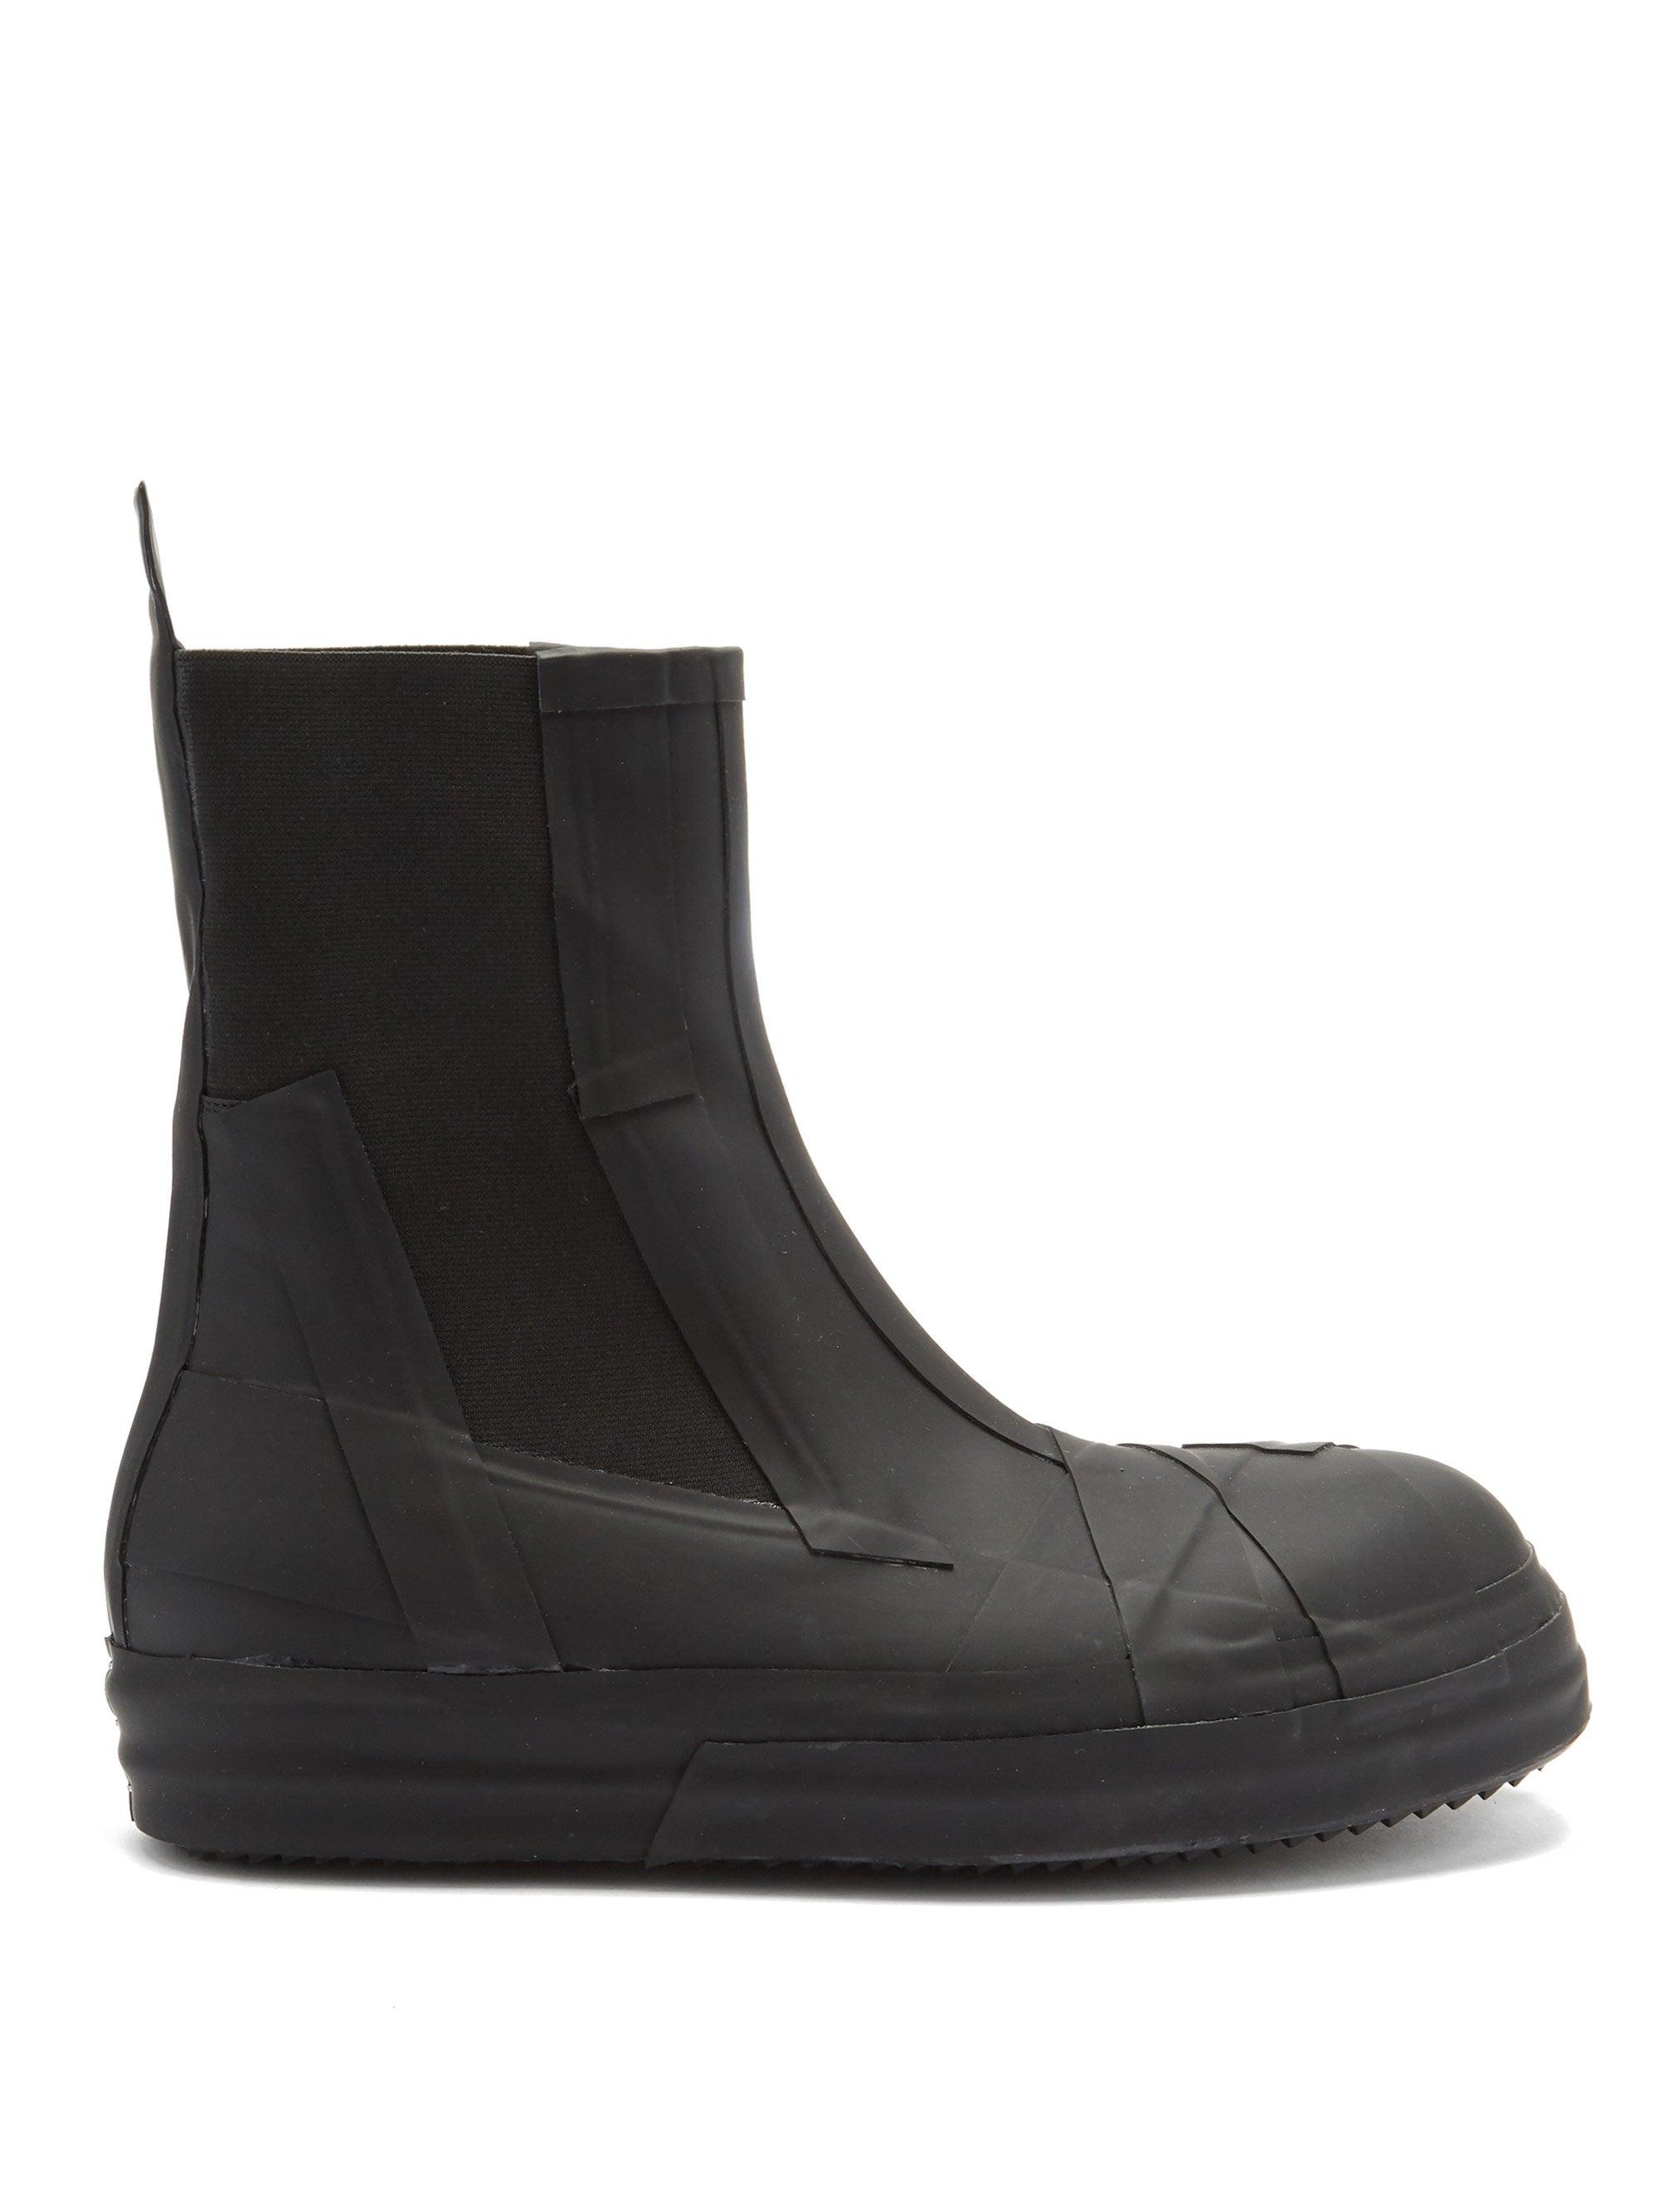 Rick Owens Bozo Rubber Chelsea Boots in Black for Men - Lyst